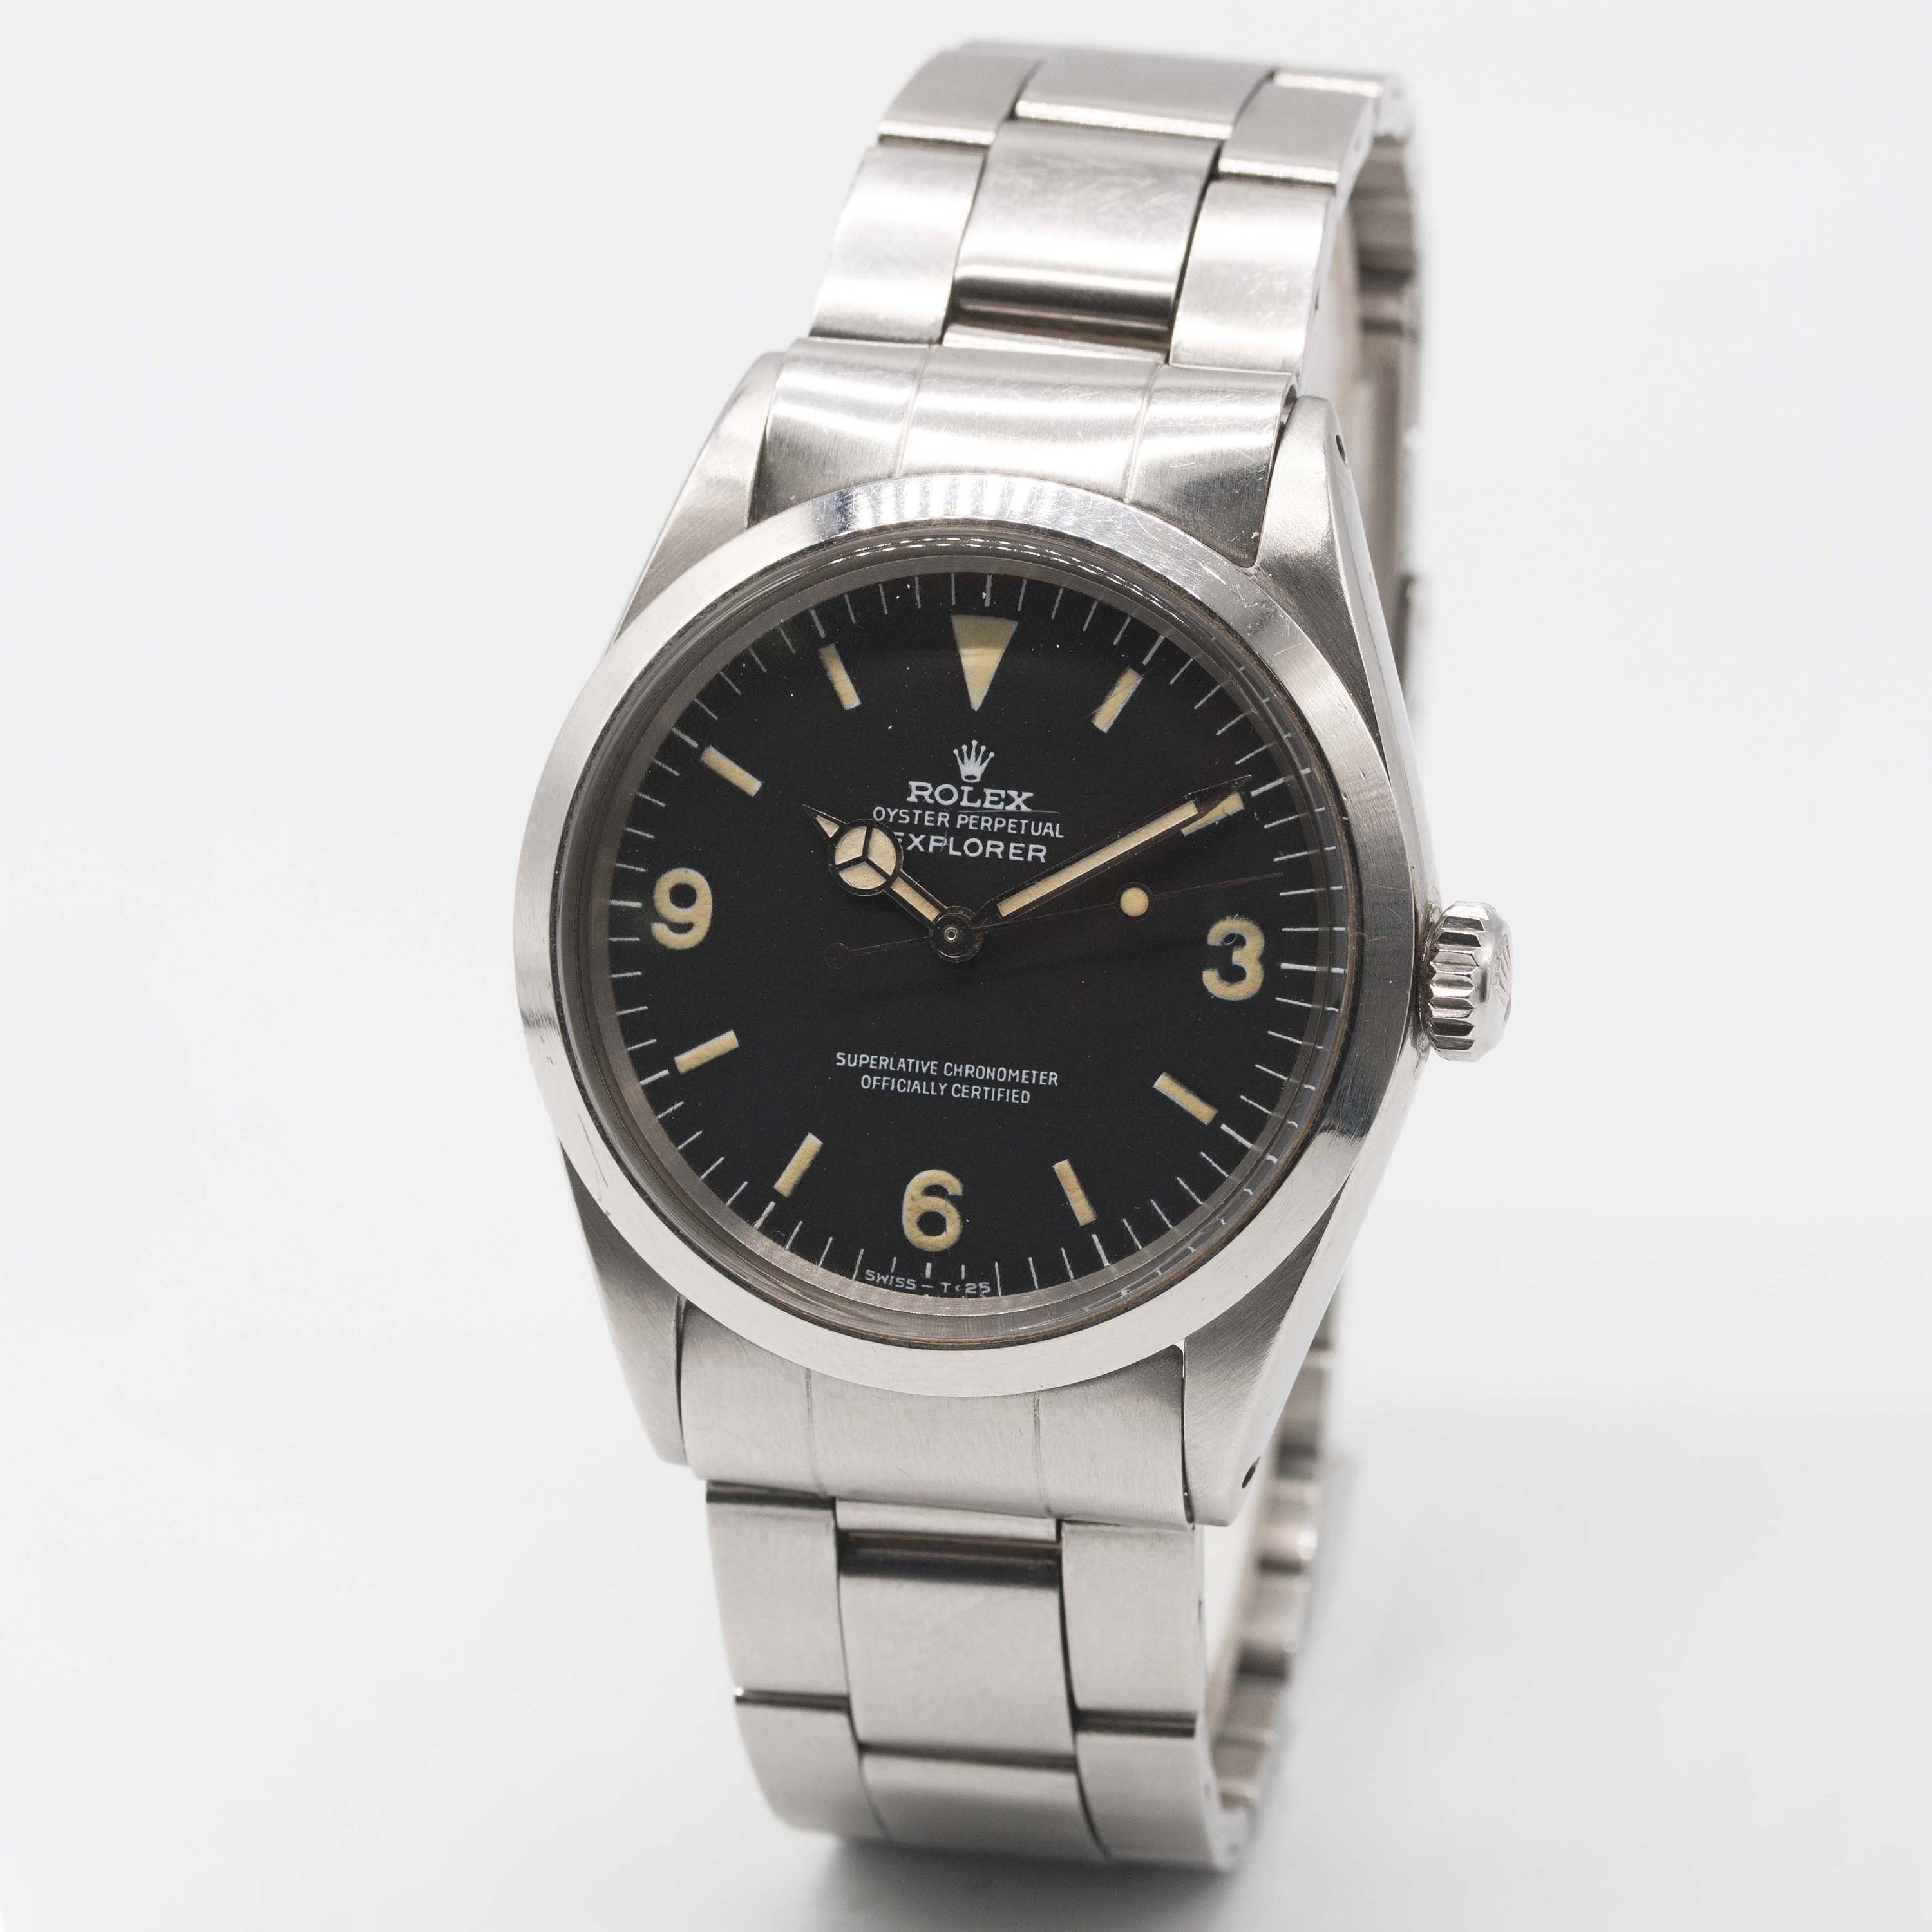 A RARE GENTLEMAN'S STAINLESS STEEL ROLEX OYSTER PERPETUAL EXPLORER BRACELET WATCH CIRCA 1972, REF. - Image 6 of 13